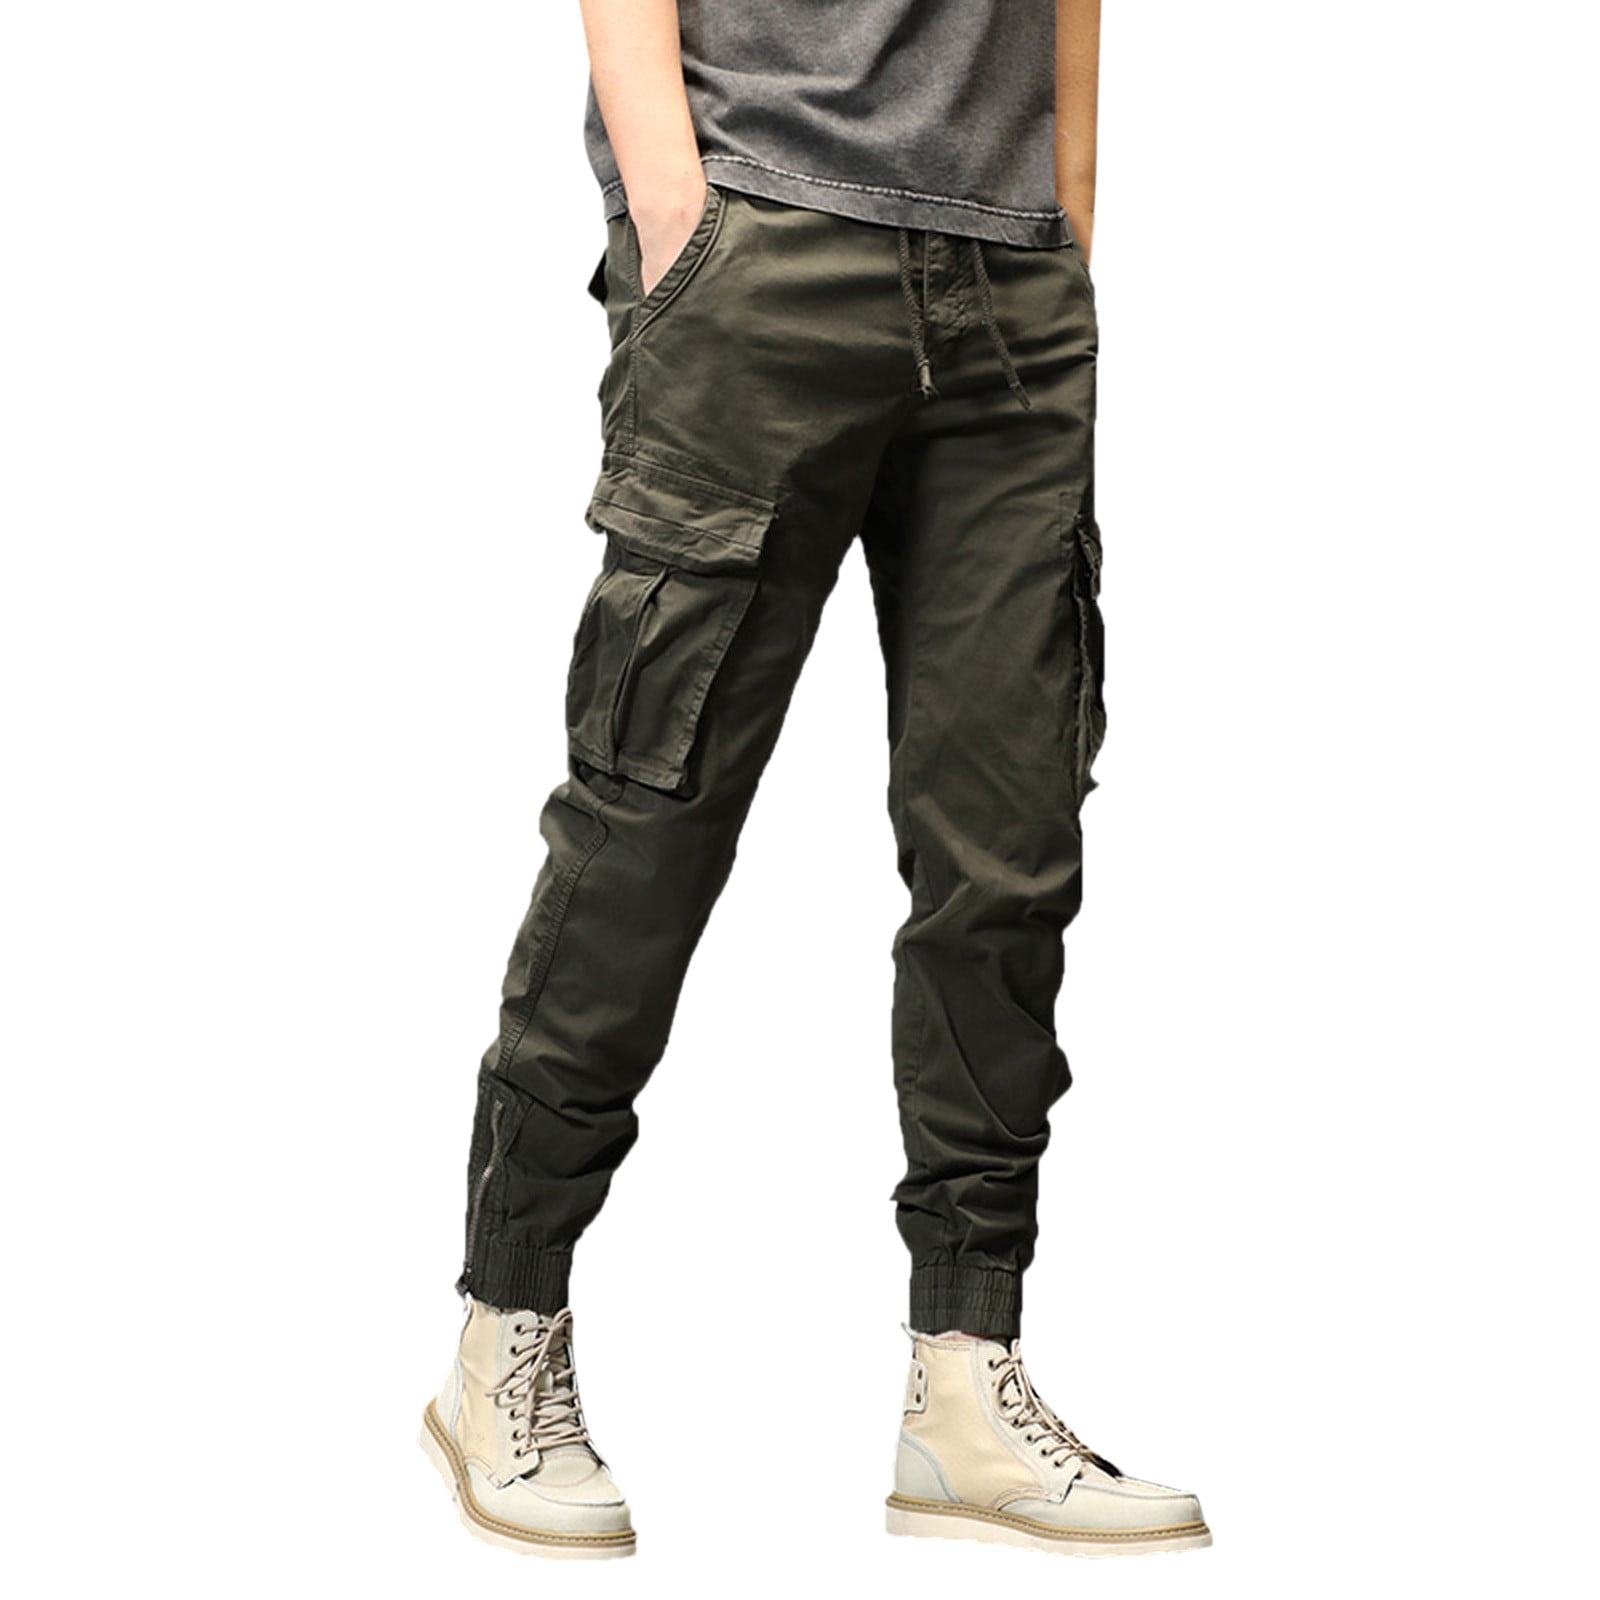  Deal of The Day Today Mens Nylon Pants Mens Brown Jeans  Breathable Pants Men Boot Cut Jeans Mens Cargo Shorts 32 Quick Dry Mens  Dress Pants Expandable Waist(01-Black,Small) : 服裝，鞋子和珠寶